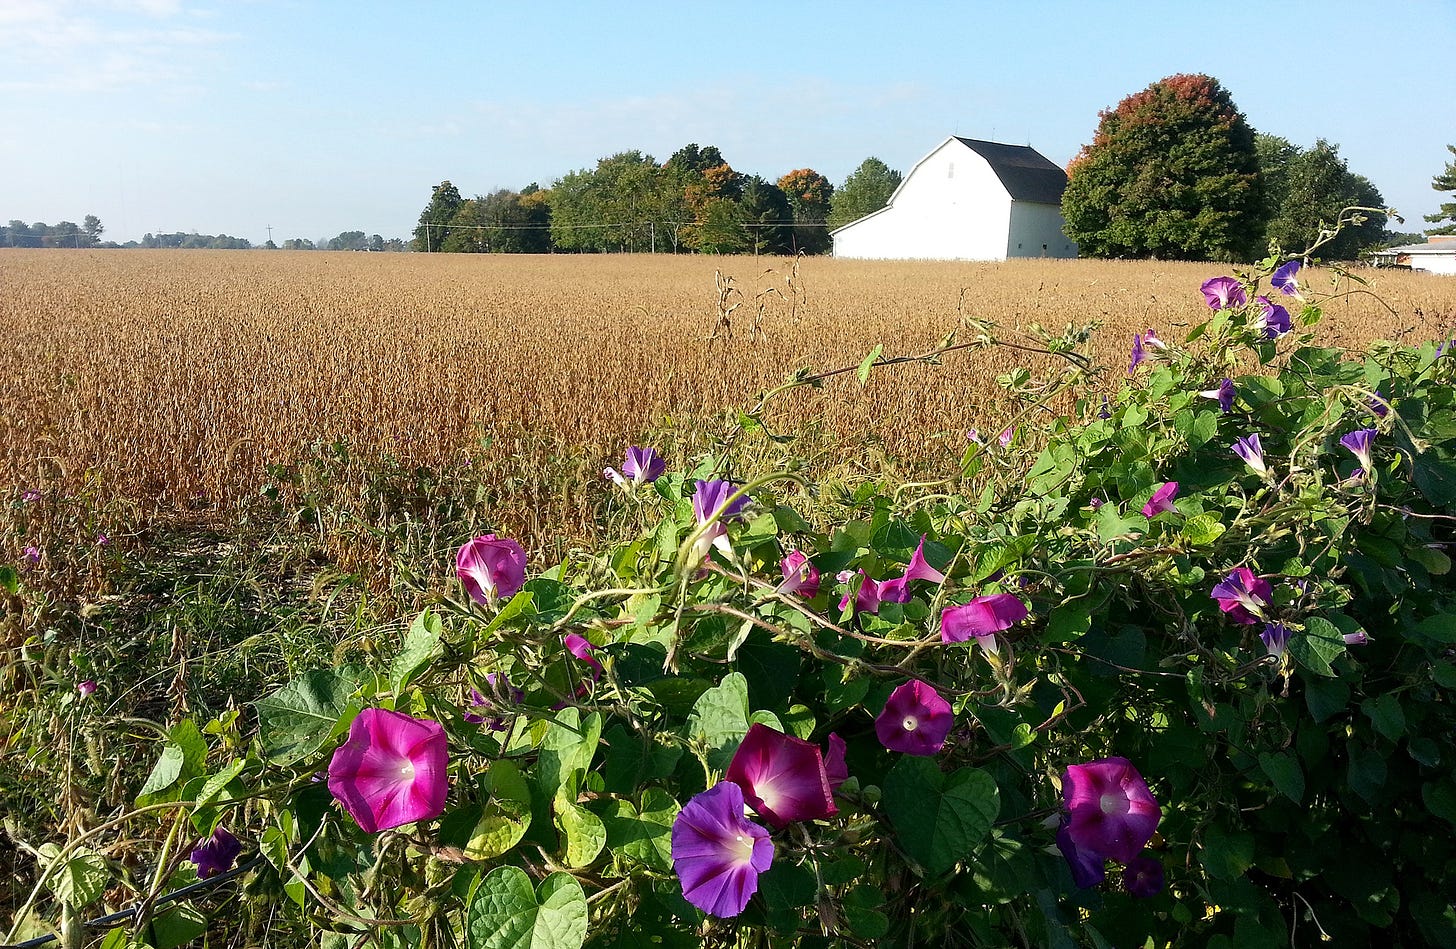 Morning Glories by the Soybeans